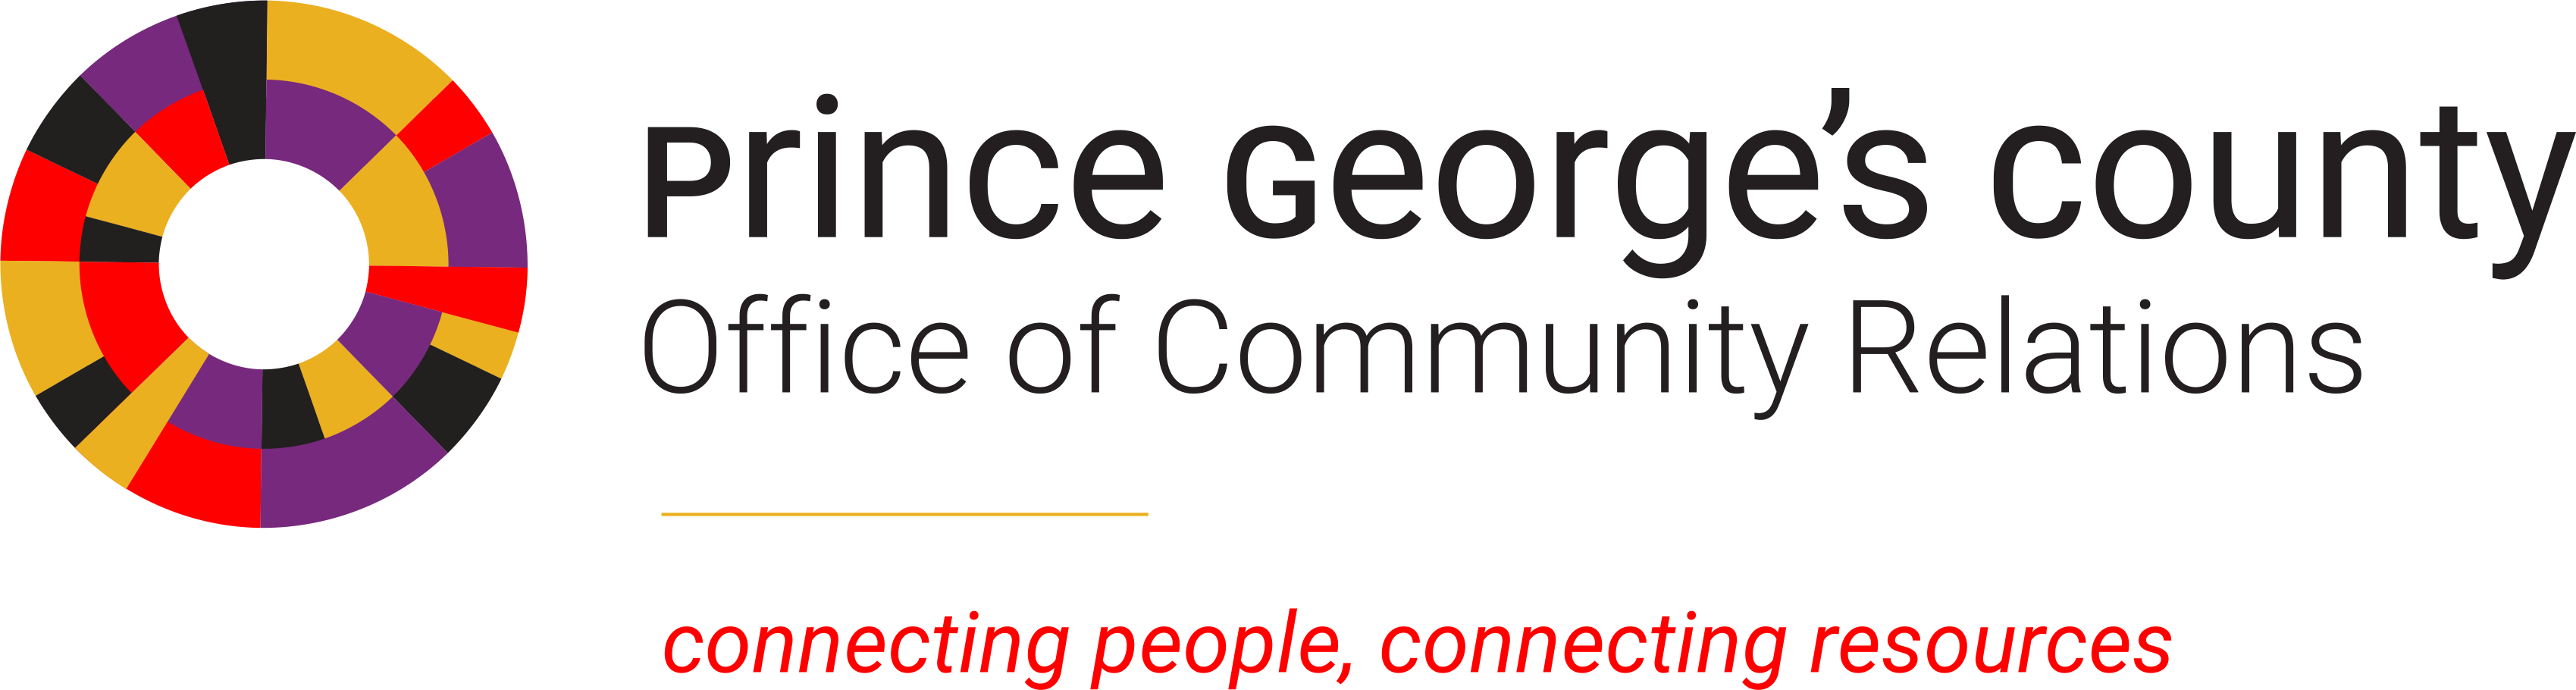 Community Relations | Prince George's County, MD